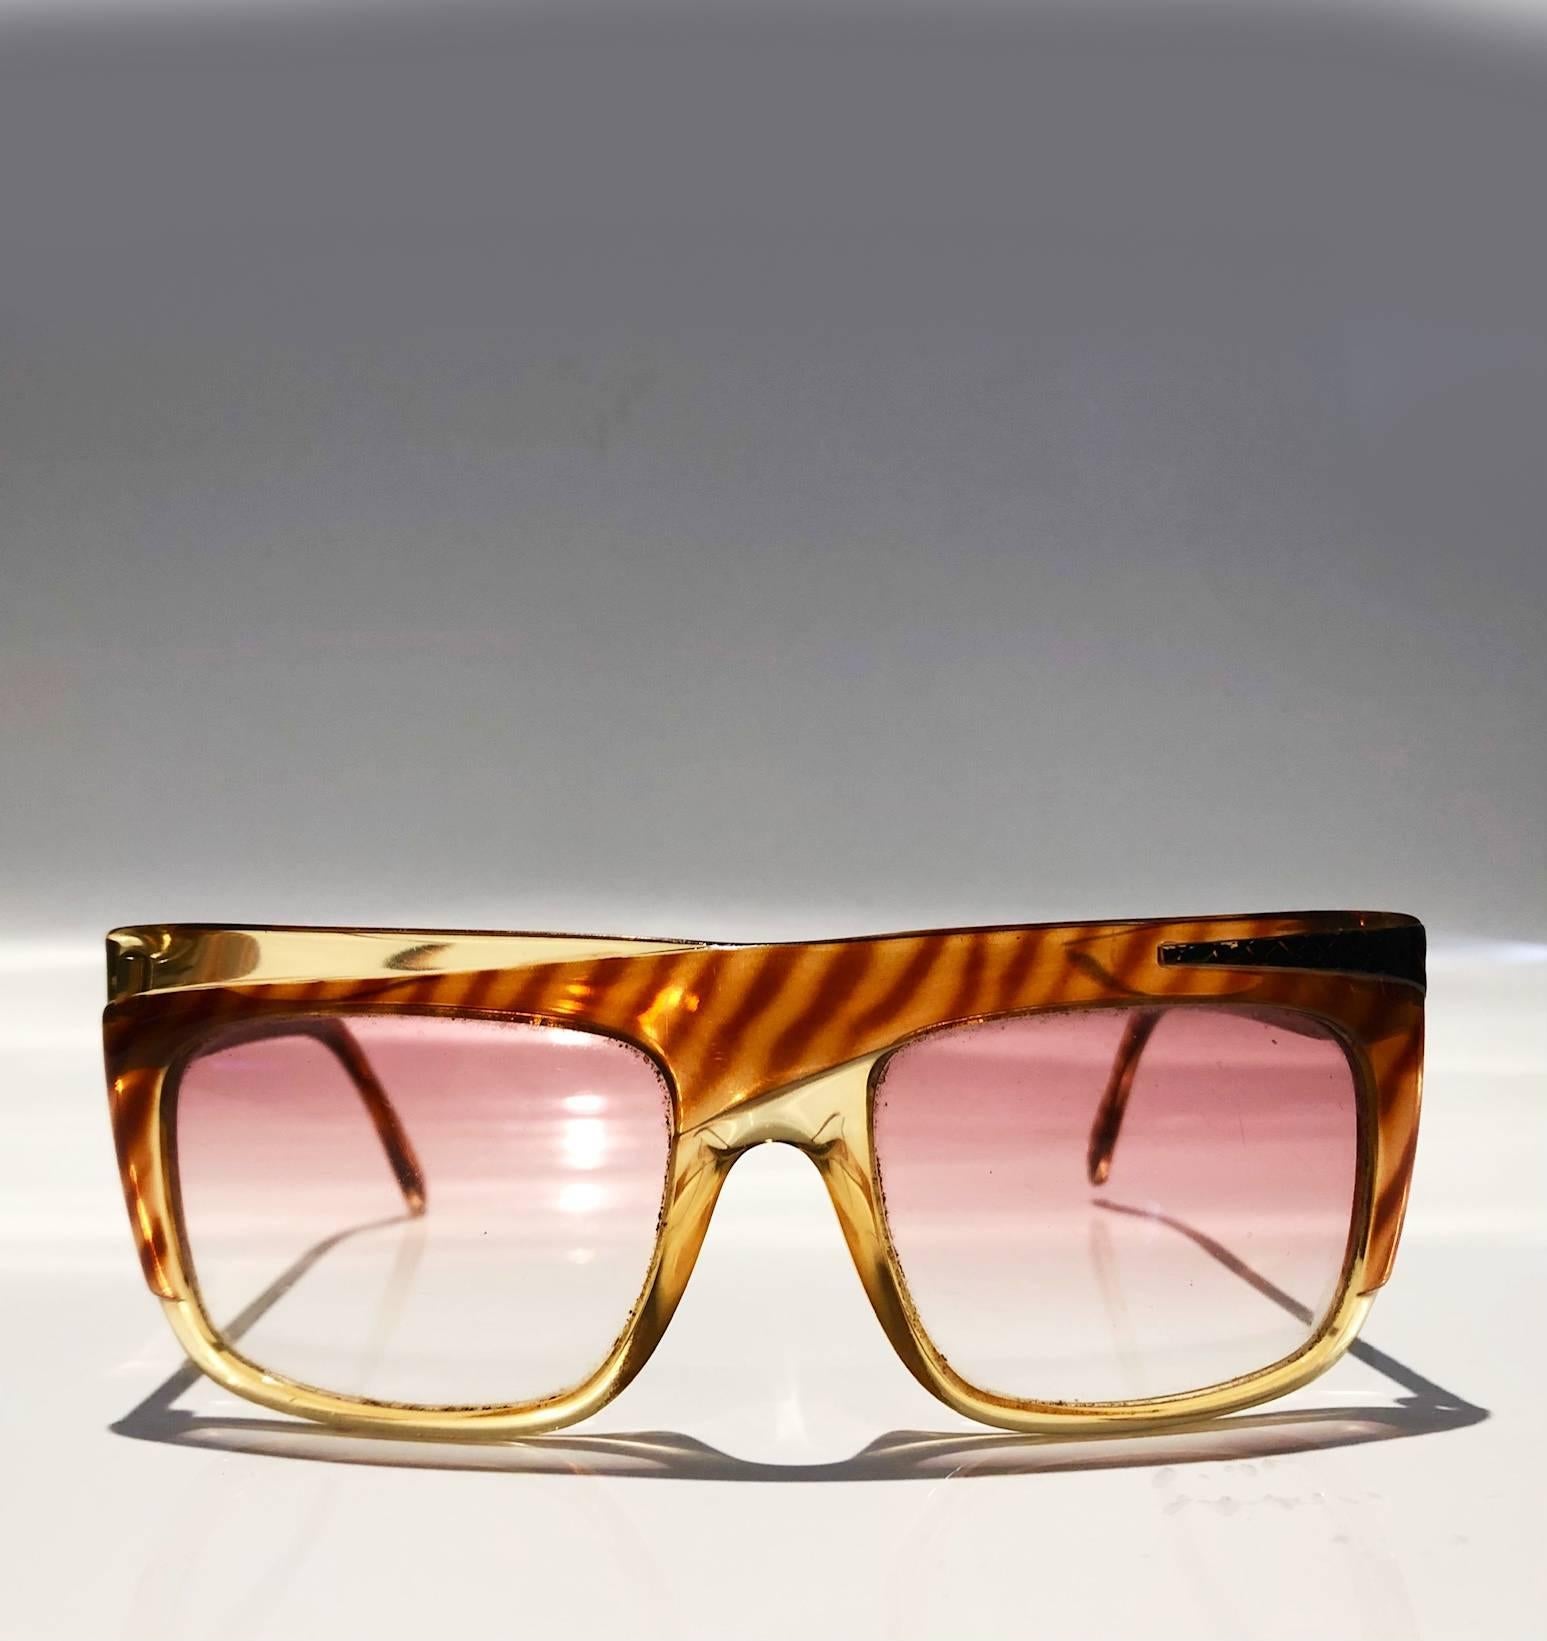 Christian Dior Bowie Amber Animal Print Oversized Sunglasses, gradient brown lenses, CD logo on side, Made in Austria
Condition: 1980s, excellent vintage, no damage or scratches, consistent with age

Measurements:  
 - frame width: 14 cm 
 - bridge